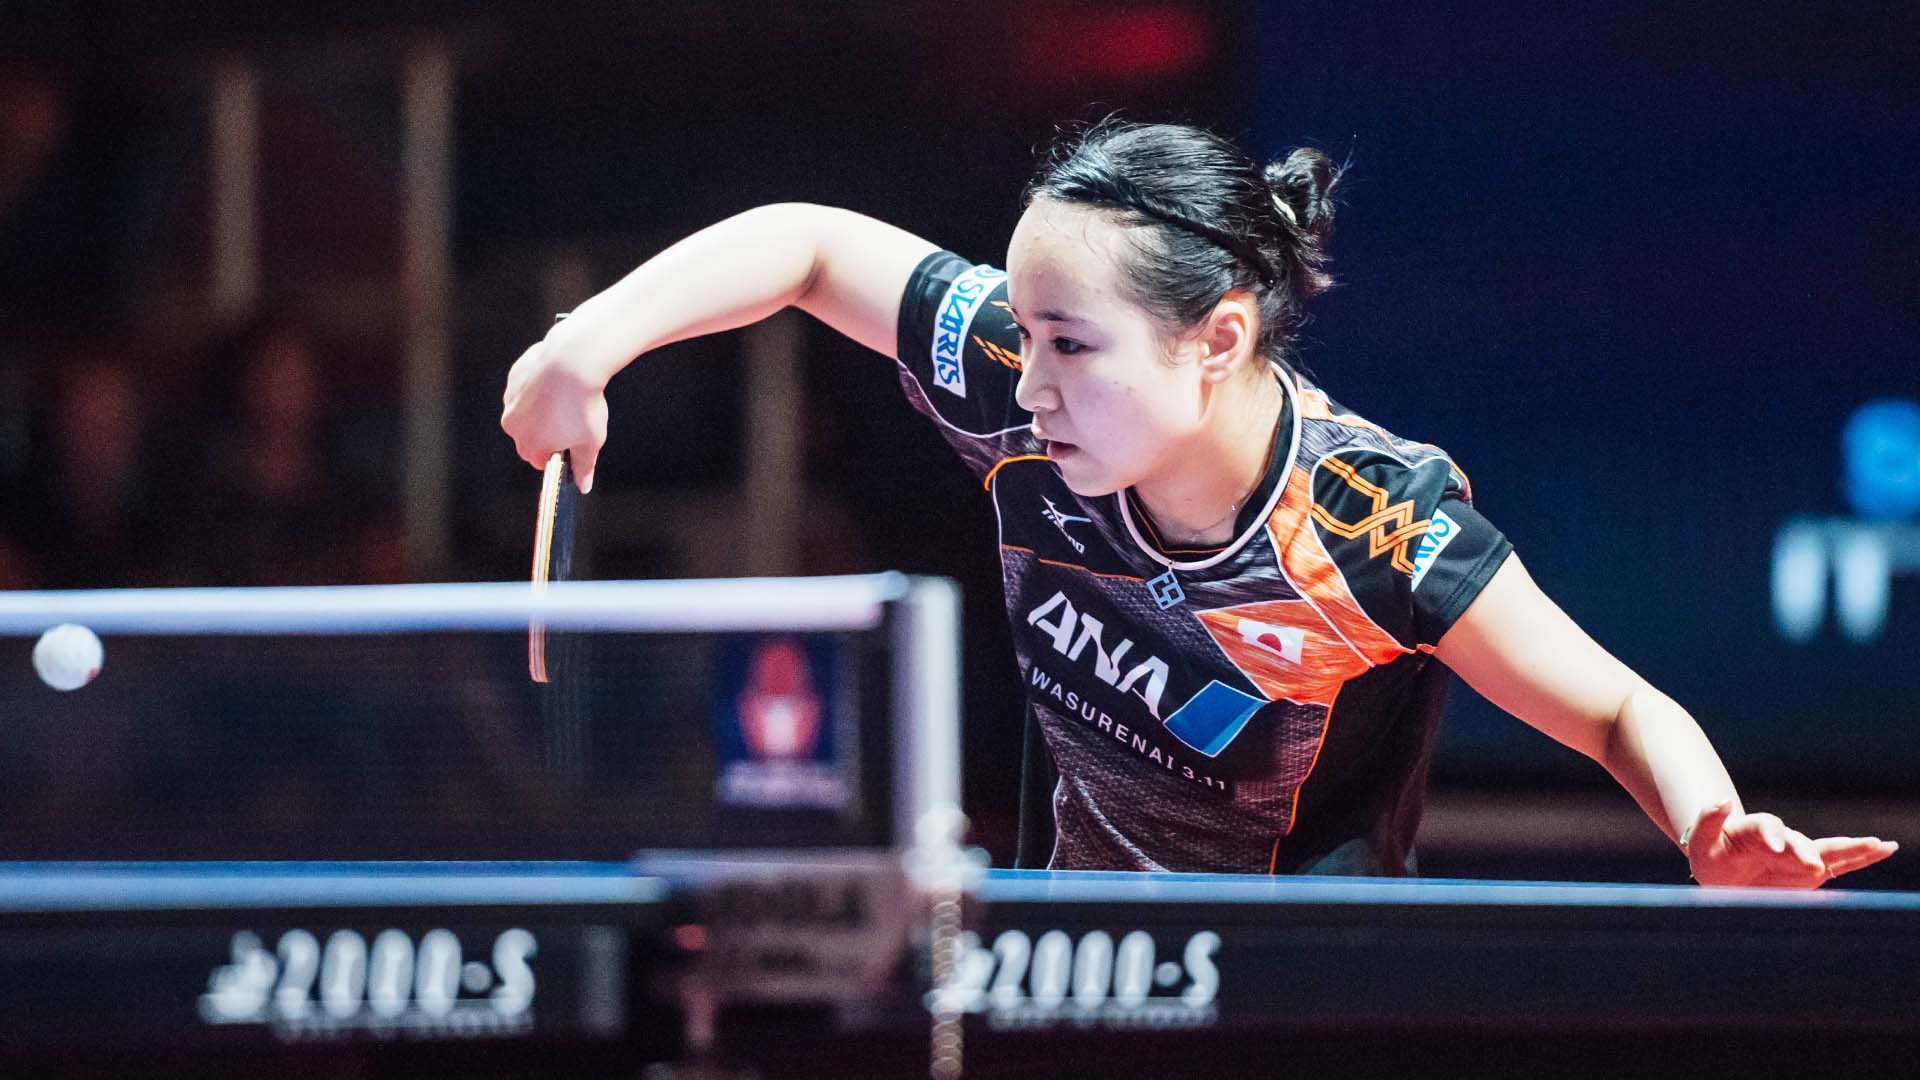 Ito seeking to return to form with title defence at ITTF Czech Open